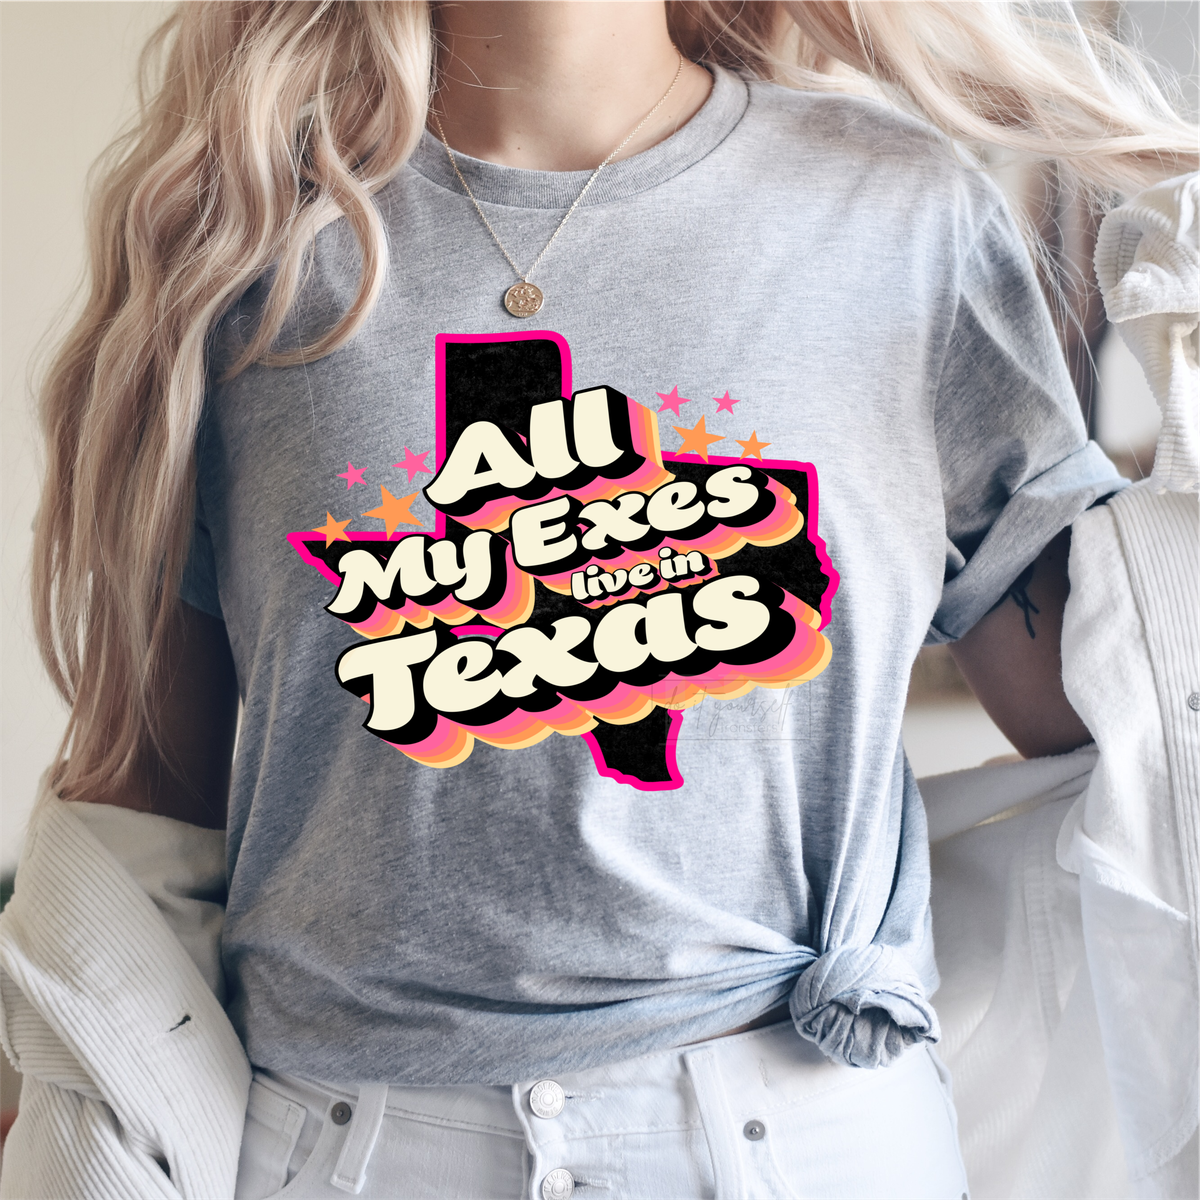 All my exes live in Texas DTF size ADULT 11.6x10 DTF TRANSFERPRINT TO ORDER